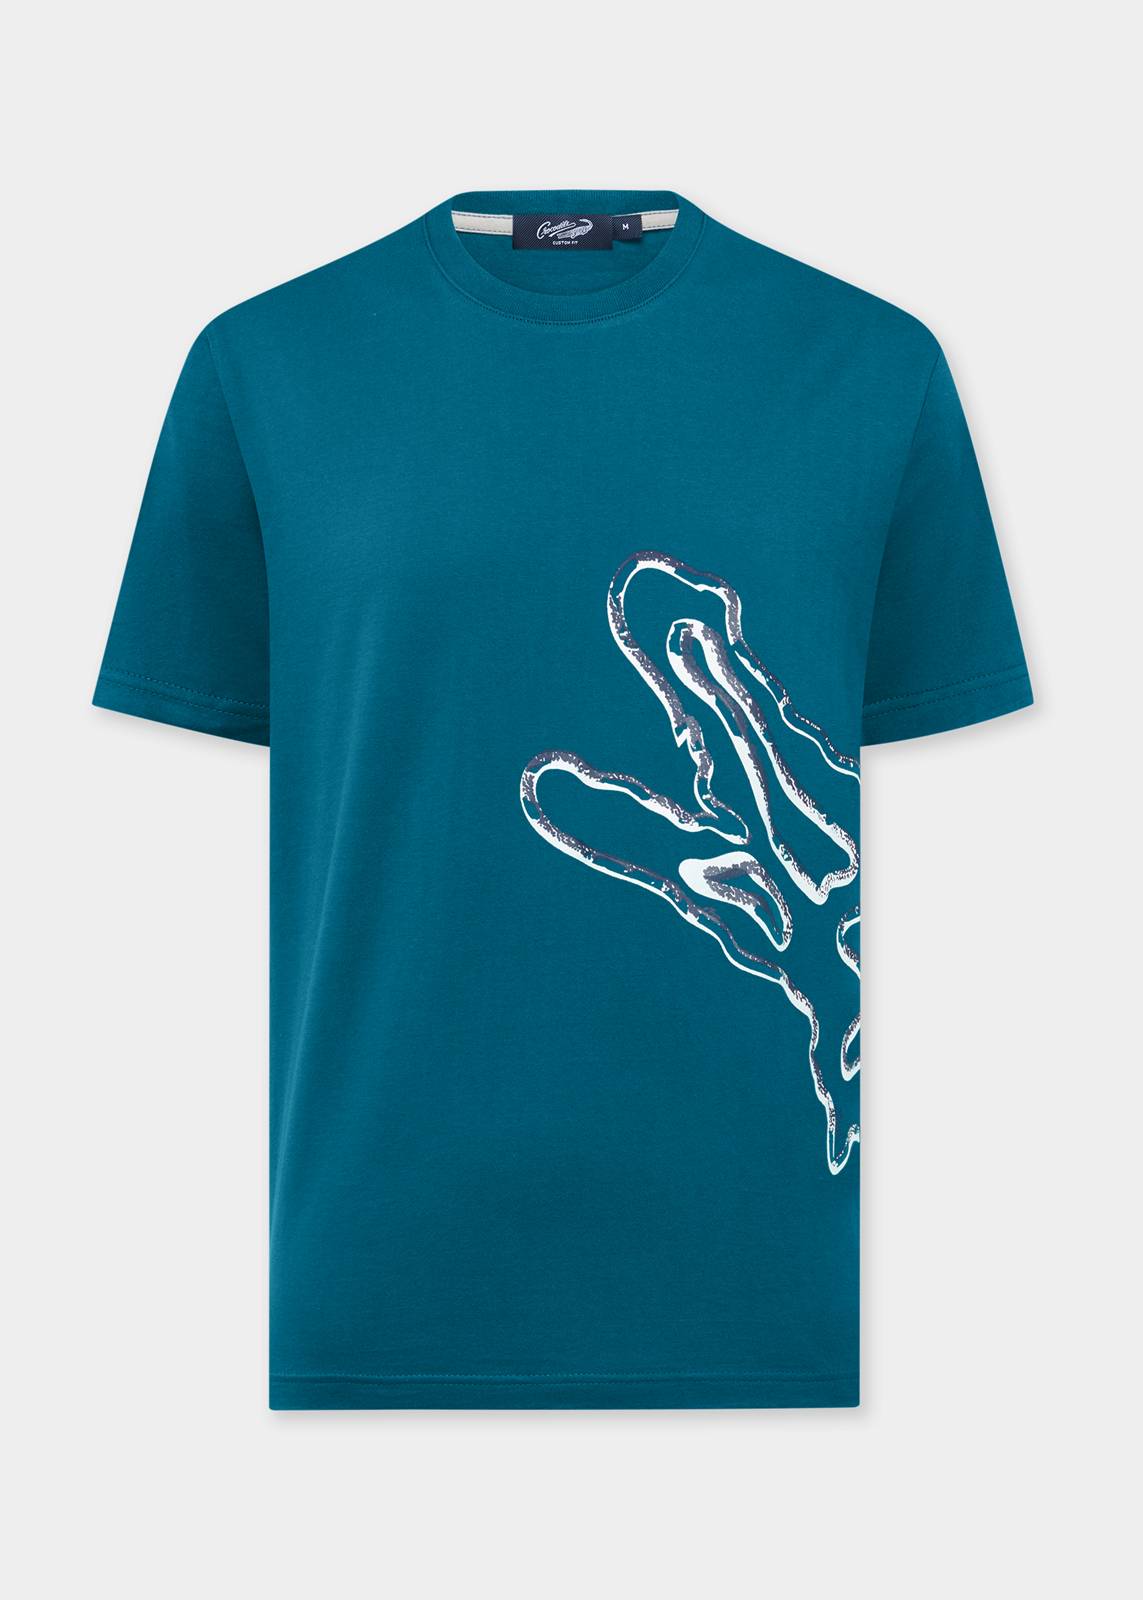 MARINE TEAL GREEN CUSTOM FIT CREW NECK T-SHIRT WITH GRAPHIC PRINT